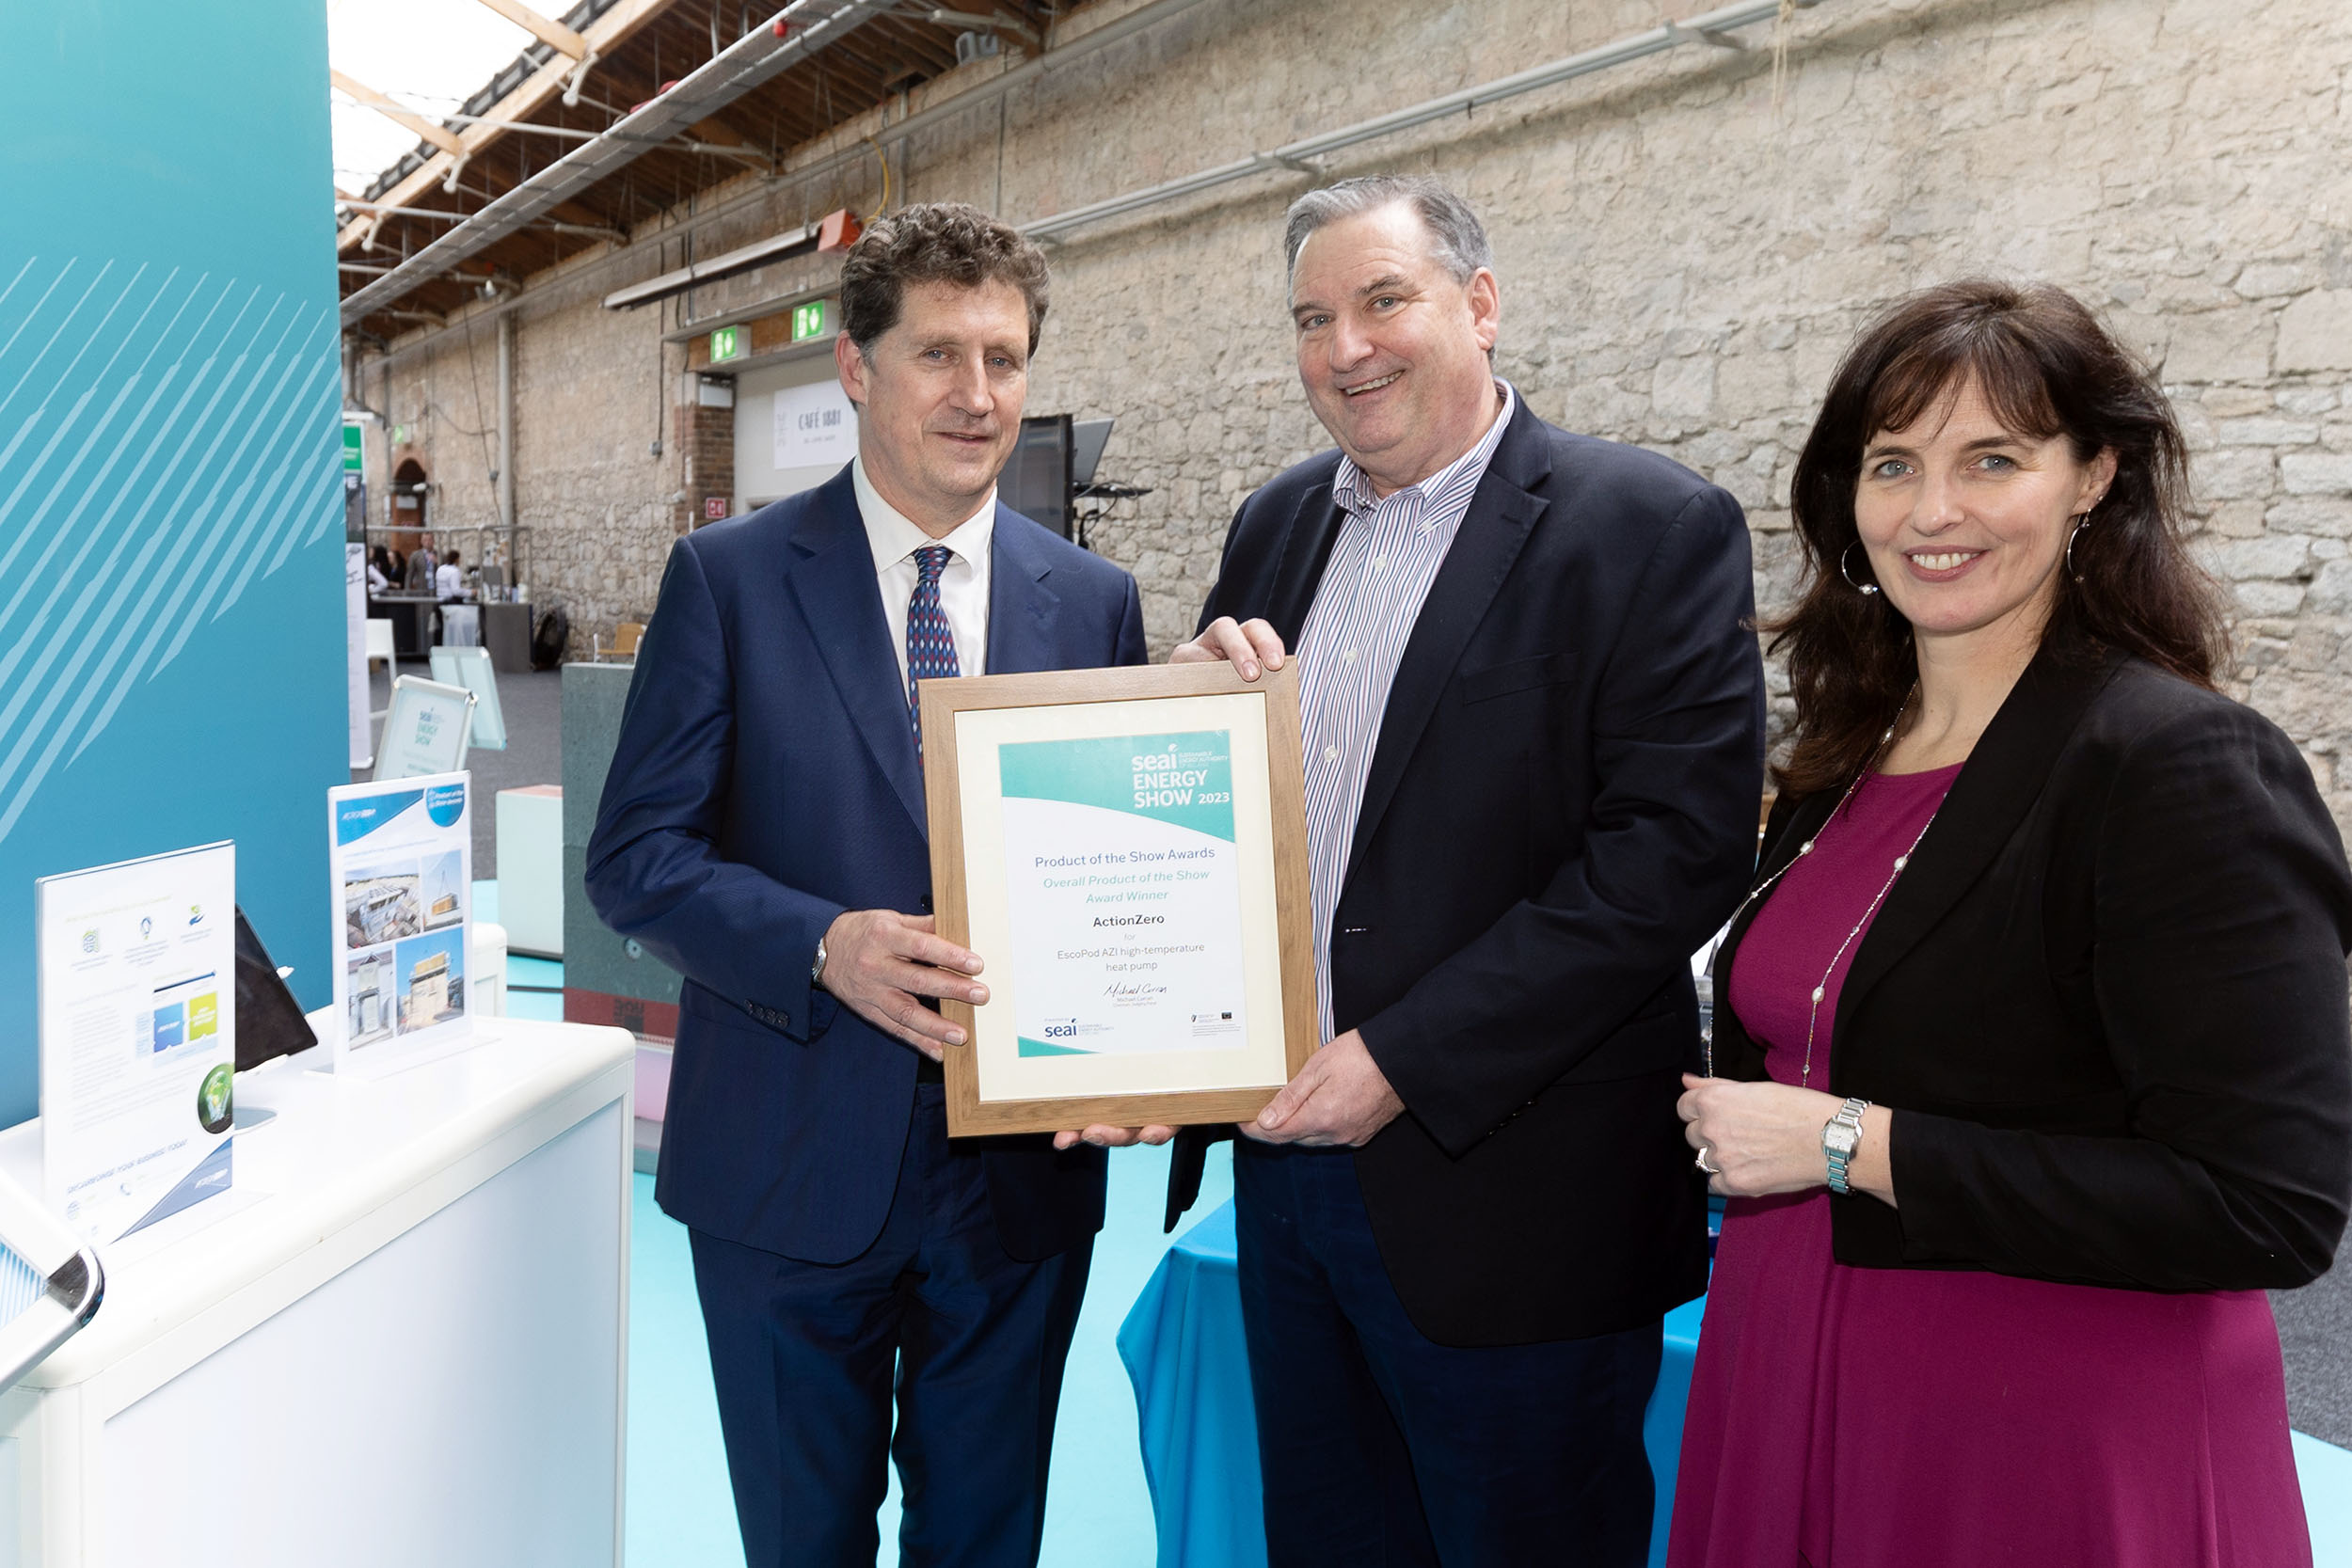 30-3-23
SEAI Energy Show 2023 Product of the Show award winner
Picture shows Minister for Environment, Climate, and Communications,  Eamon Ryan TD; Denis Collins, CEO, of Action Zero, who were named SEAI Product of the show winners for their high temperature heat pump ; and Margie McCarthy, Director of Research and Policy Insight SEAI. Pic:naoise Culhane Photography-no fee